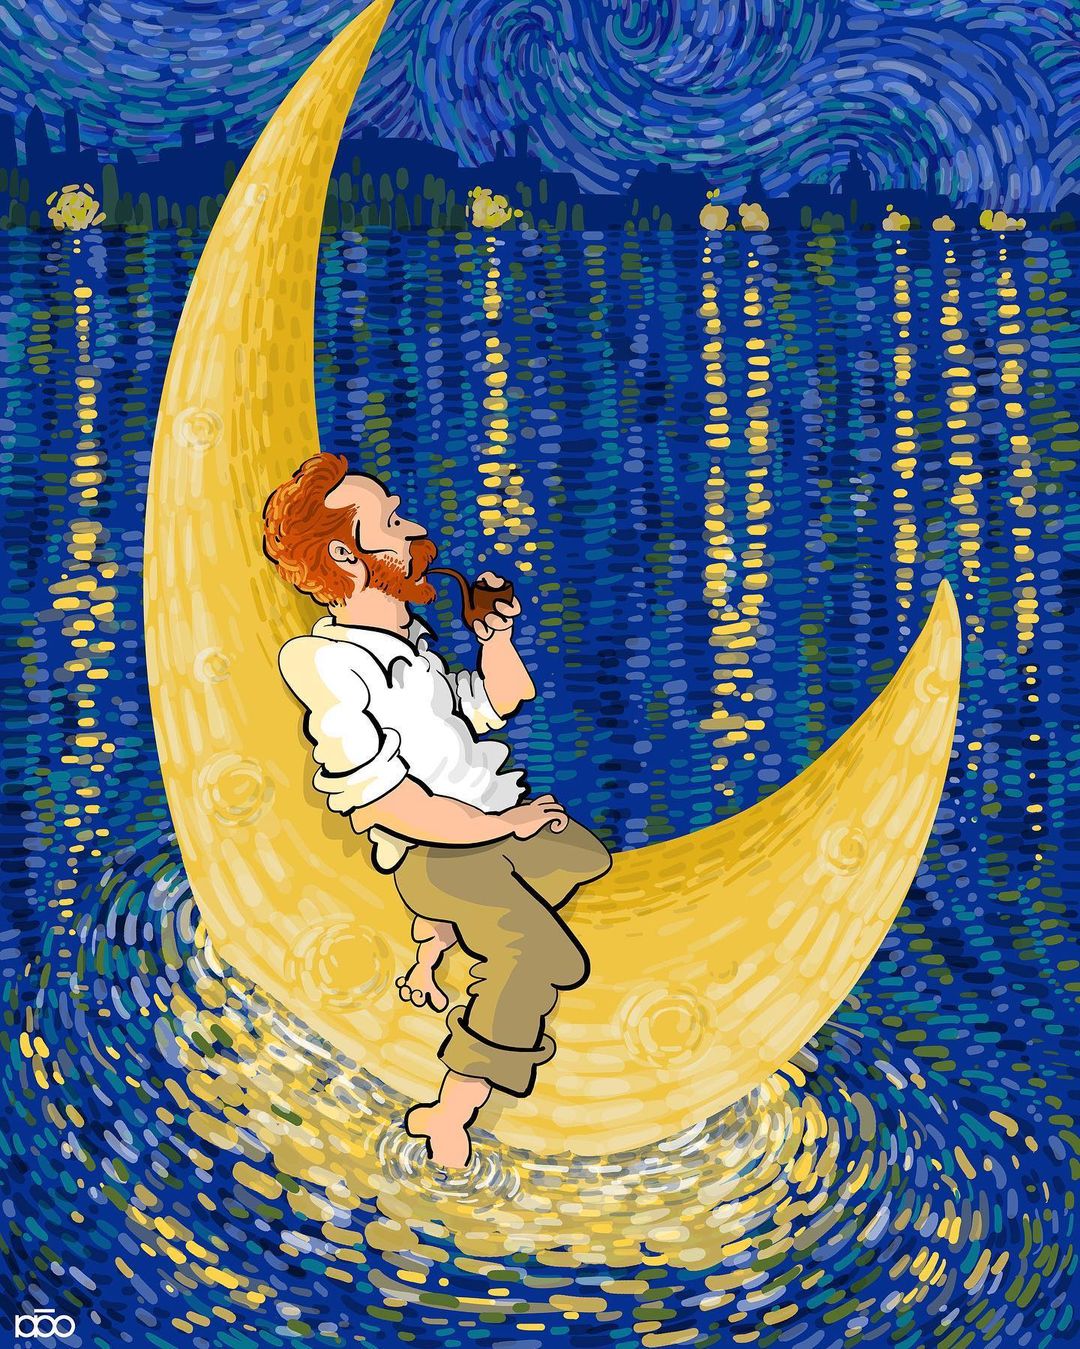 Vincent Van Goghs Life Recreated In His Own Art Style By Alireza Karimi Moghaddam 19